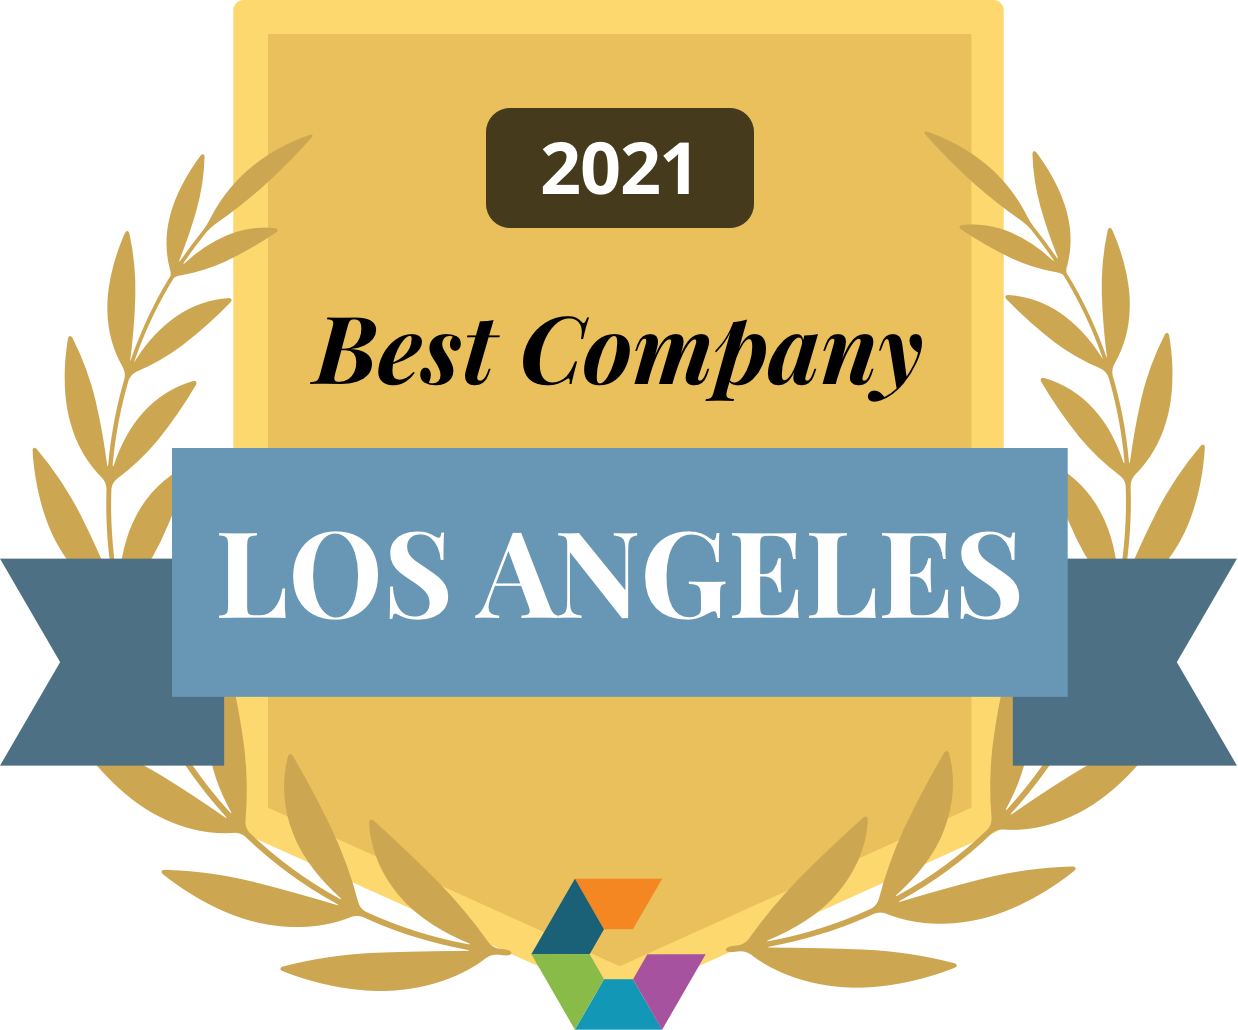 comparably best company los angeles culture award